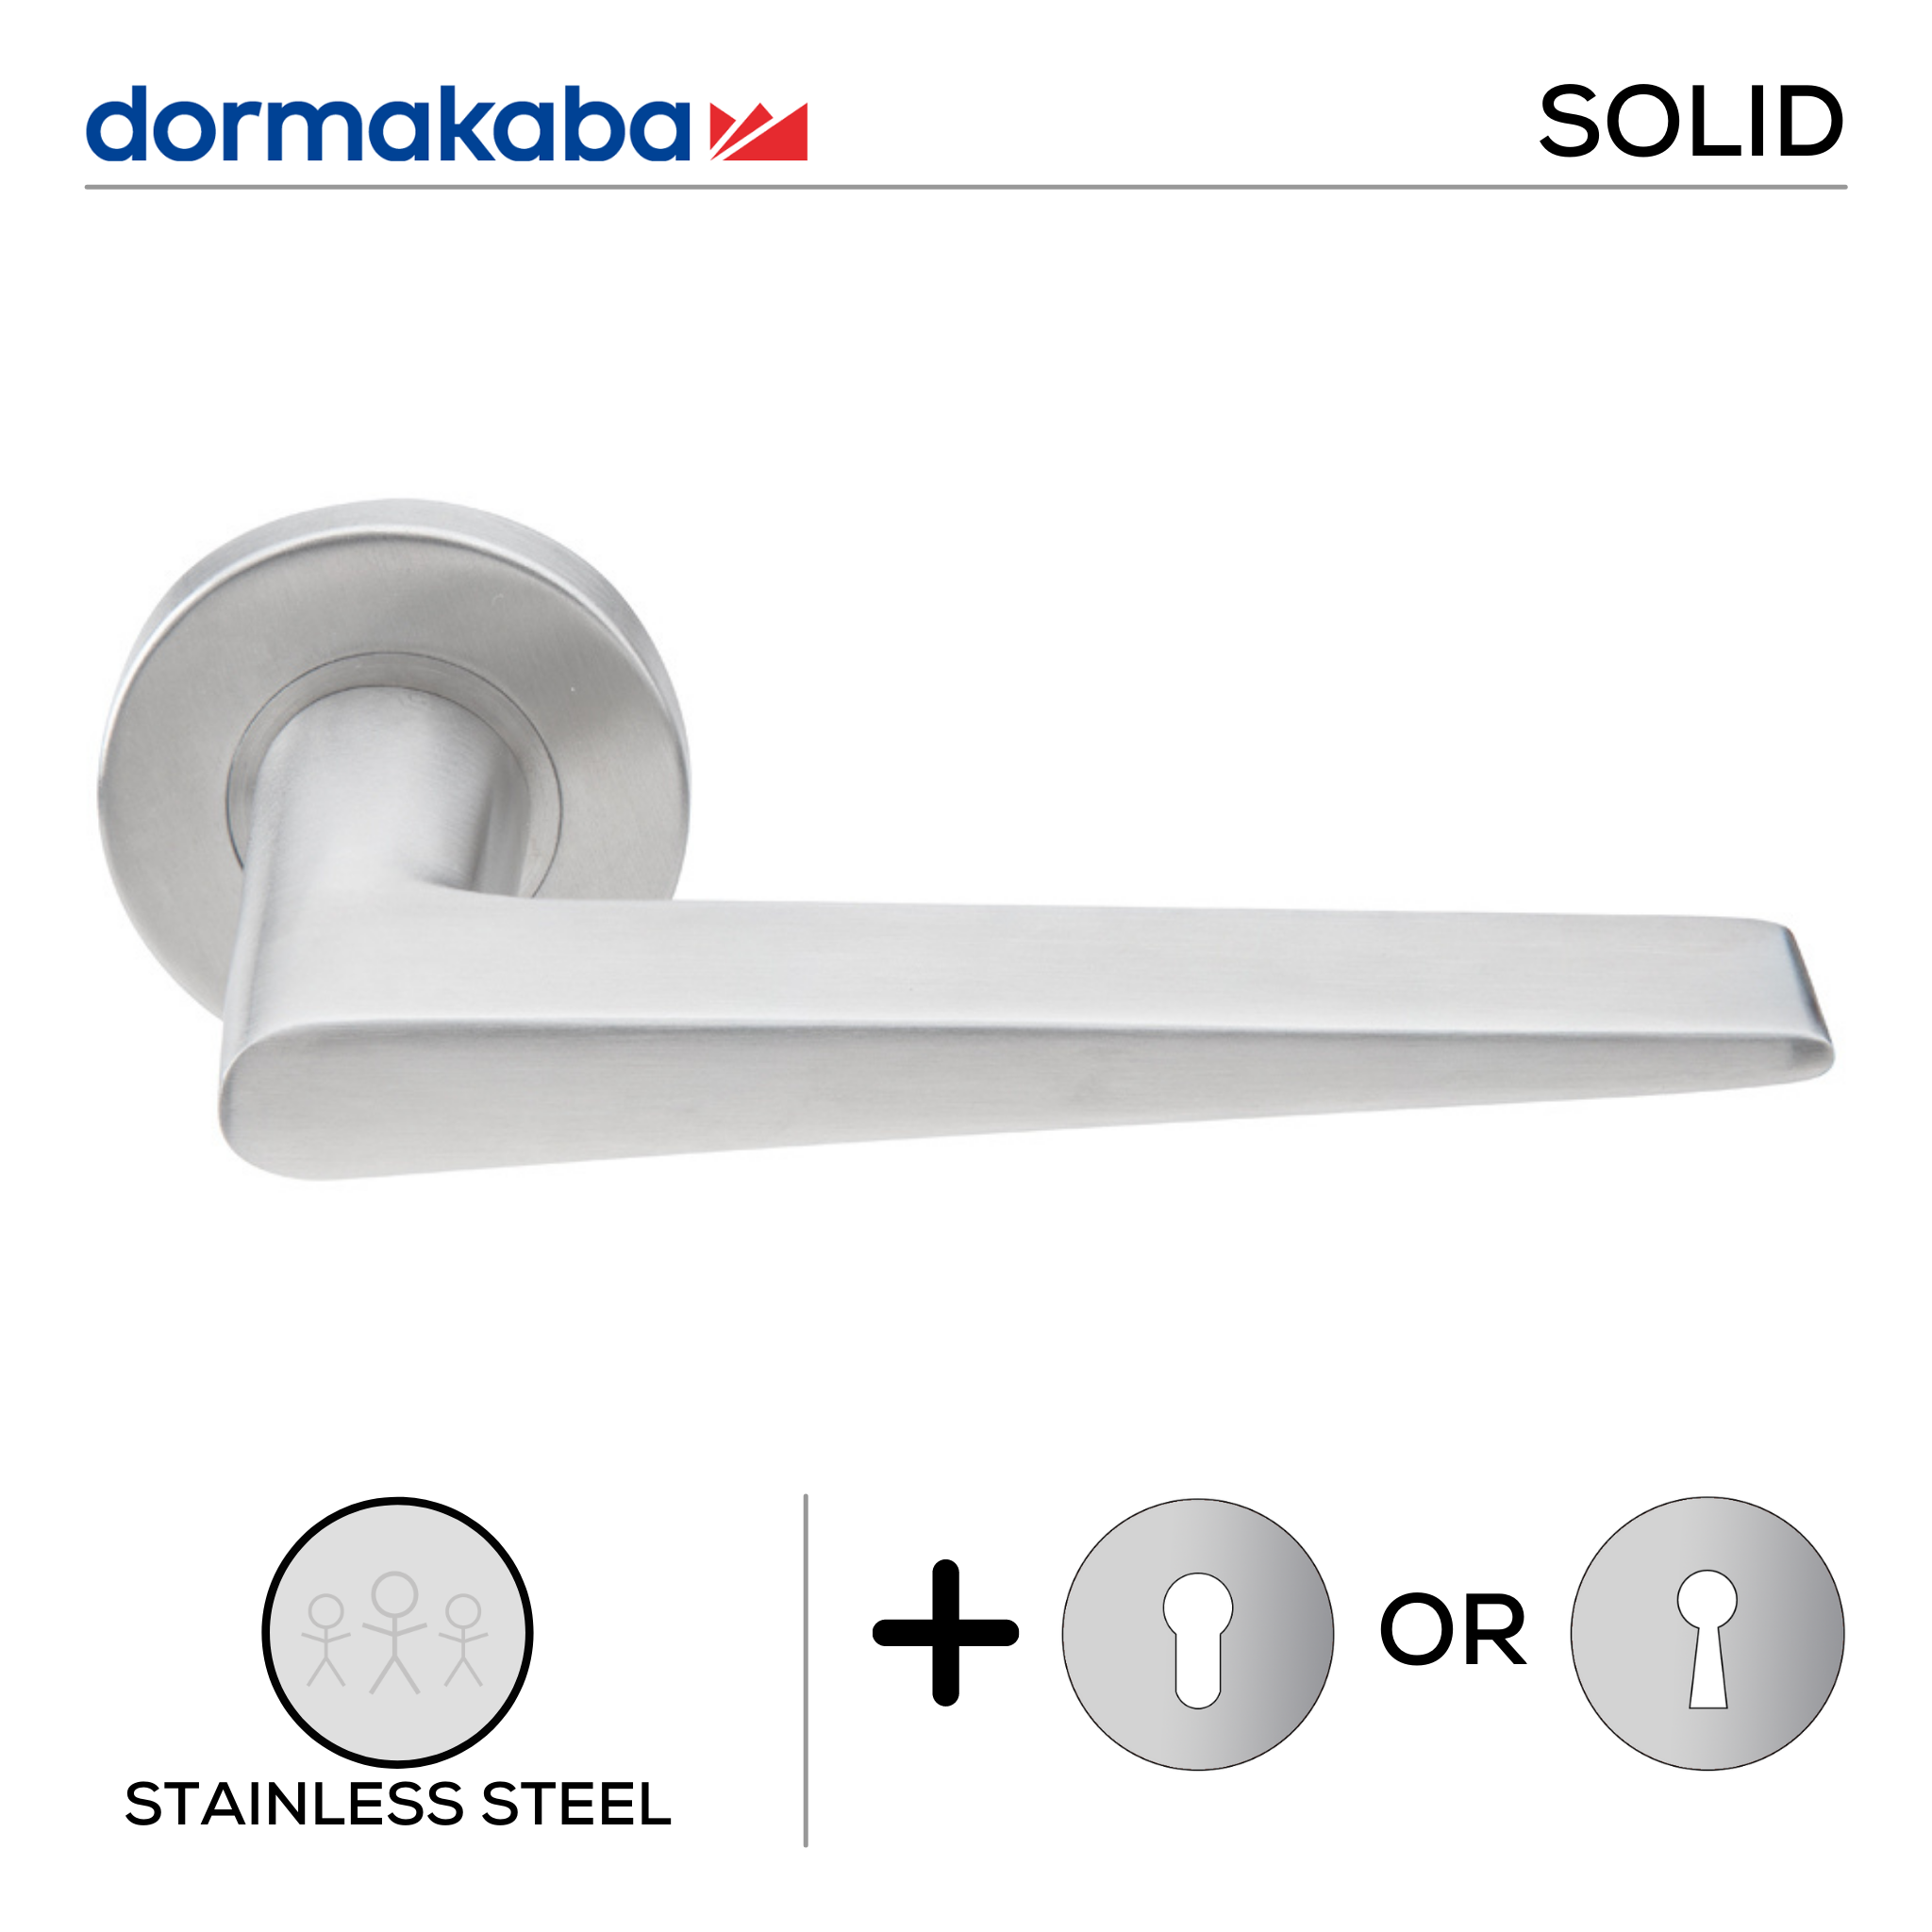 SH 821, Lever Handles, Solid, On Round Rose, With Escutcheons, 143mm (l), Stainless Steel, DORMAKABA